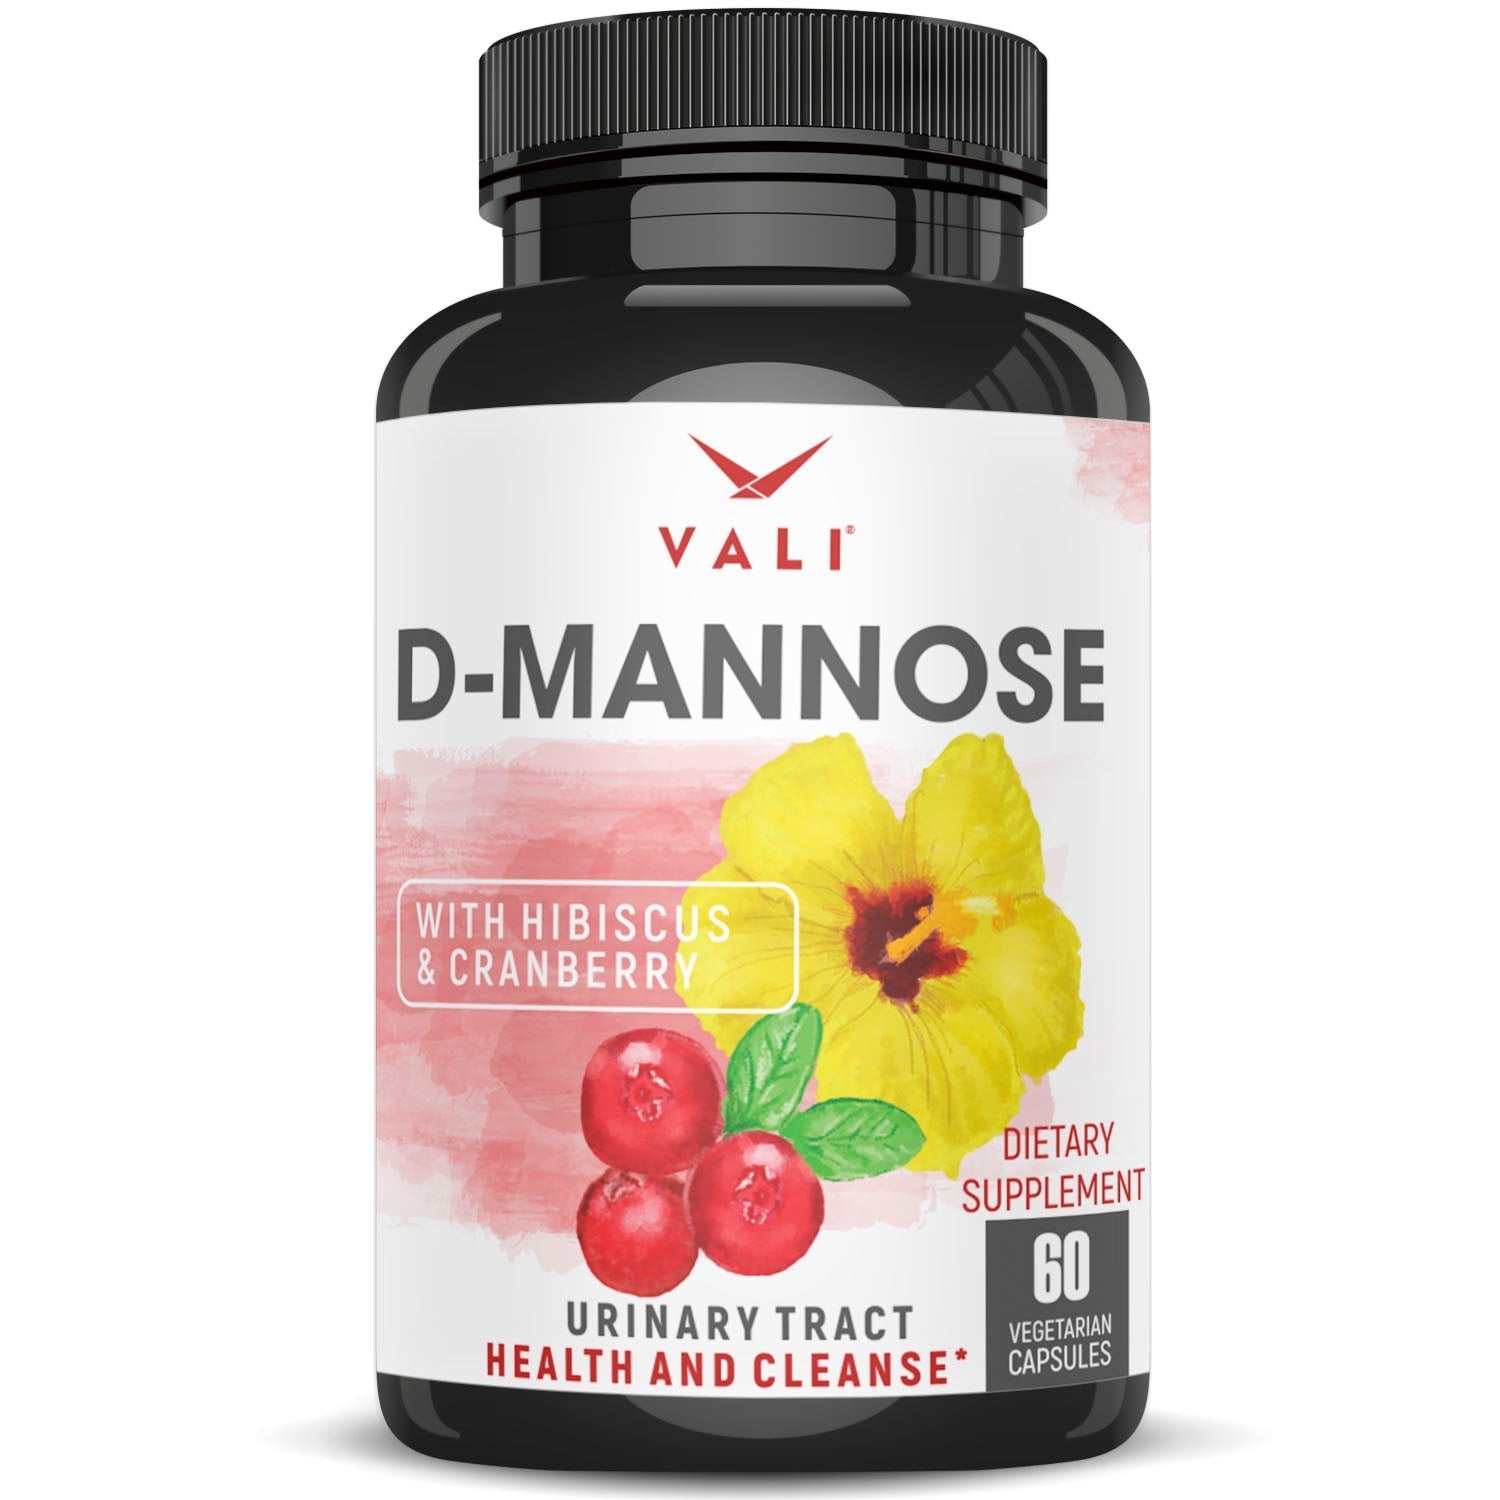 VALI D-Mannose UTI Support - Urinary Tract Health & Cleanse [OFFER]